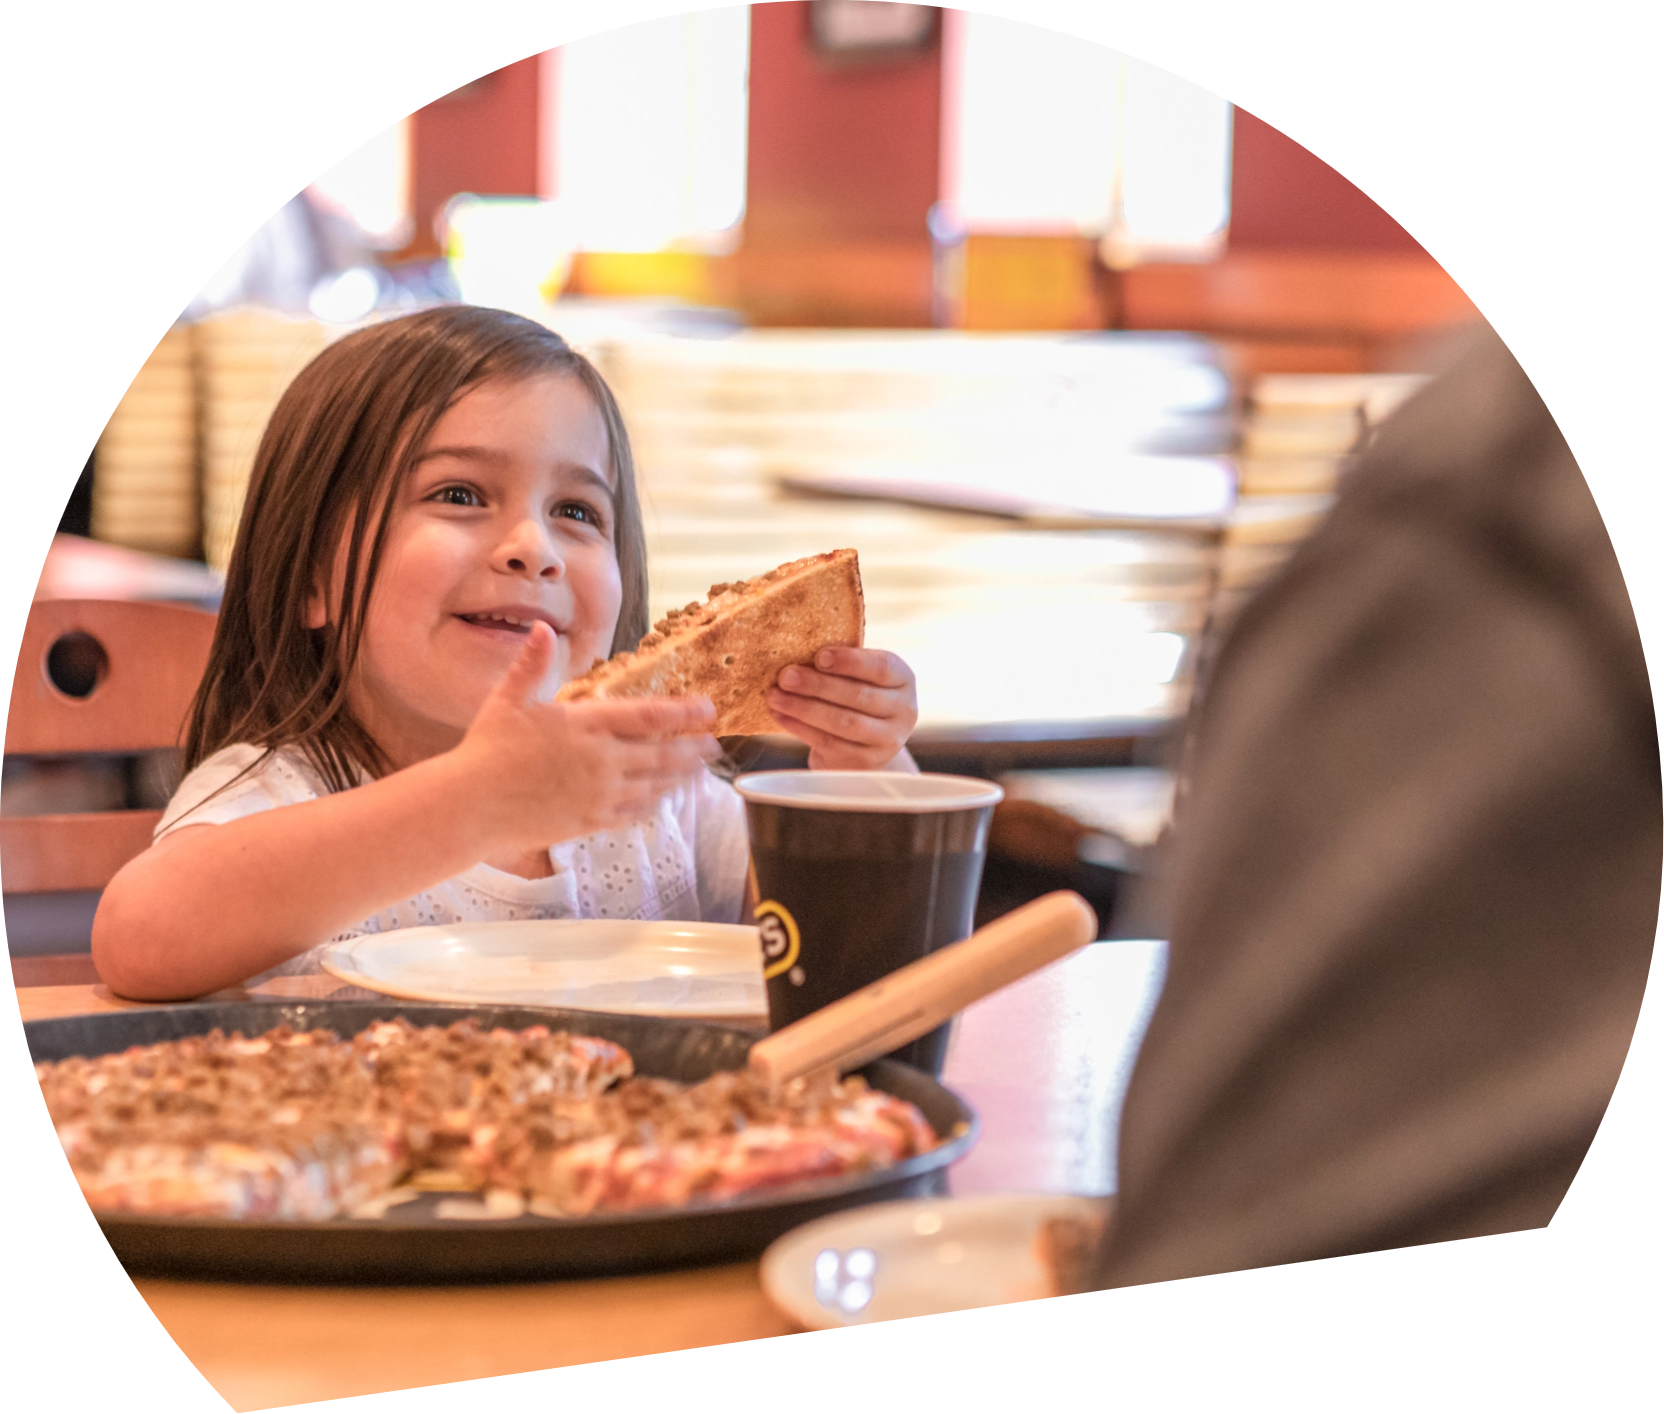 Round image with girl eating a slice of pizza